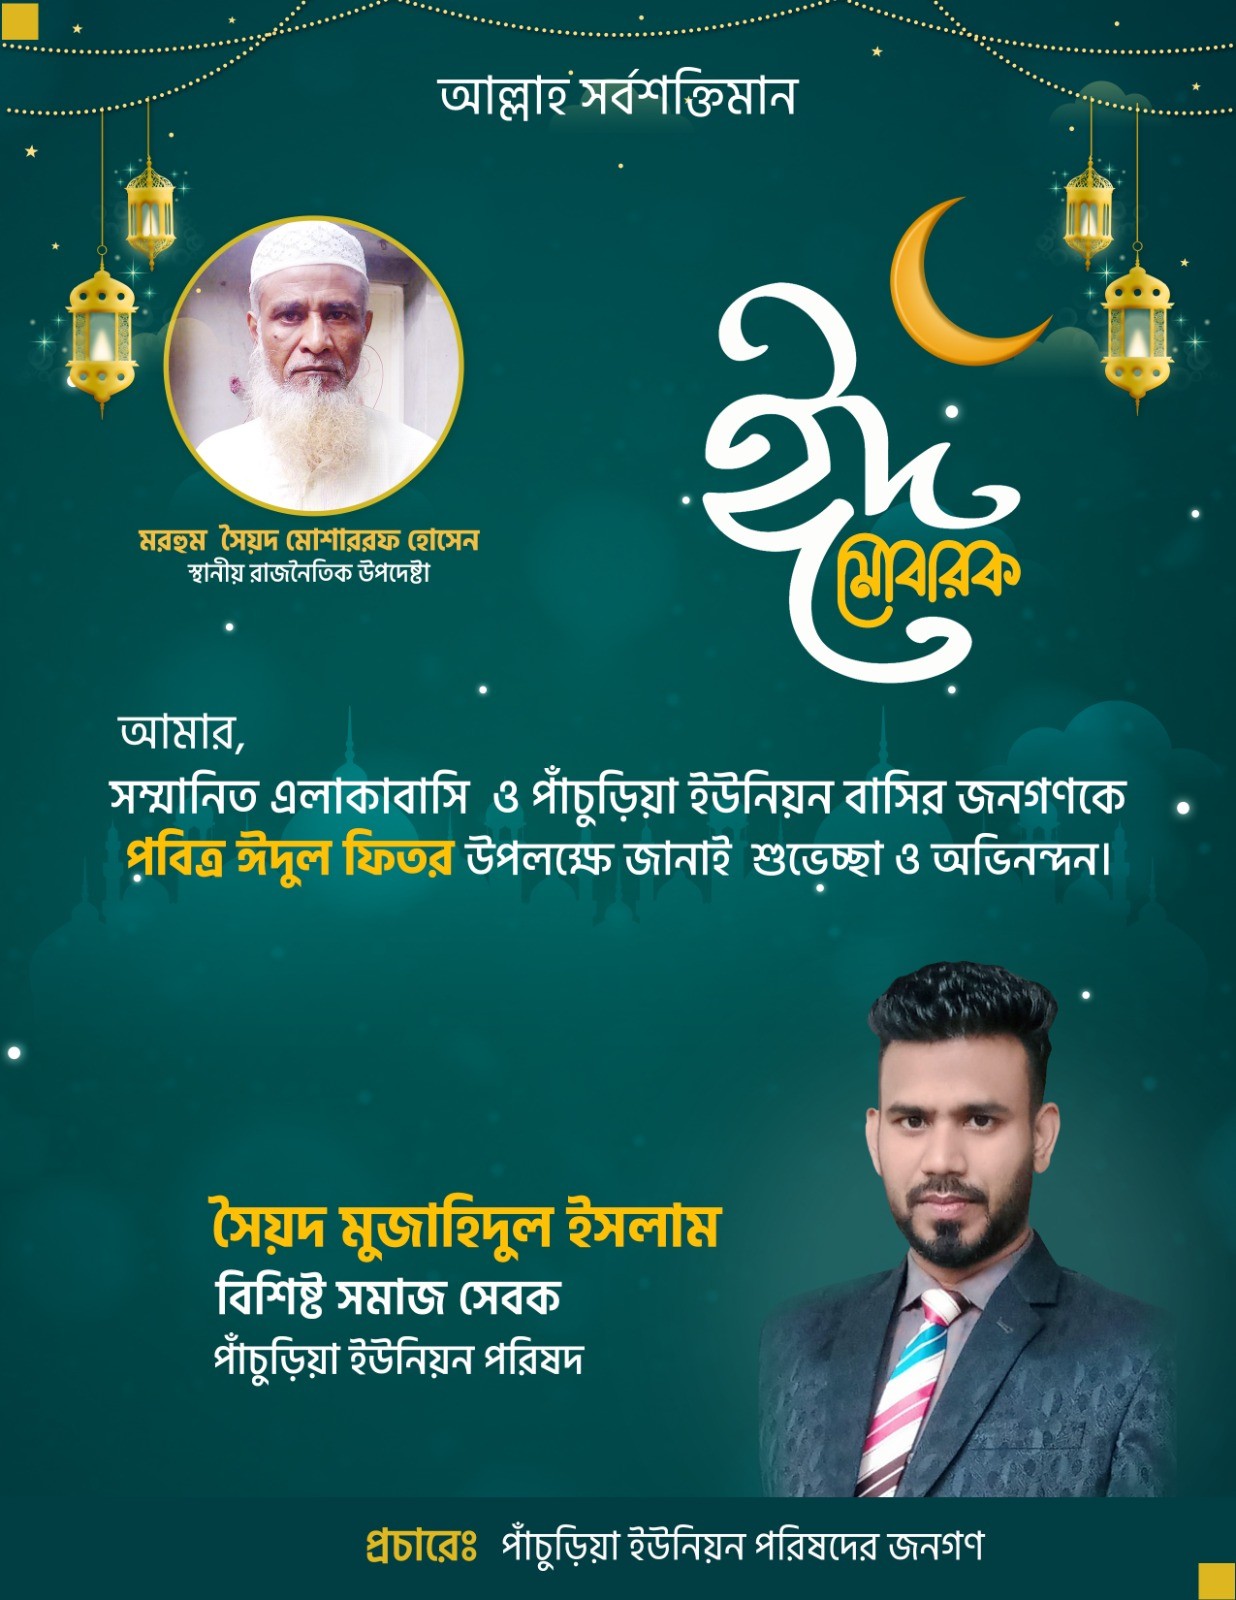 Happy Eid-ul-fitr  for the respected peoples of pachuria union.